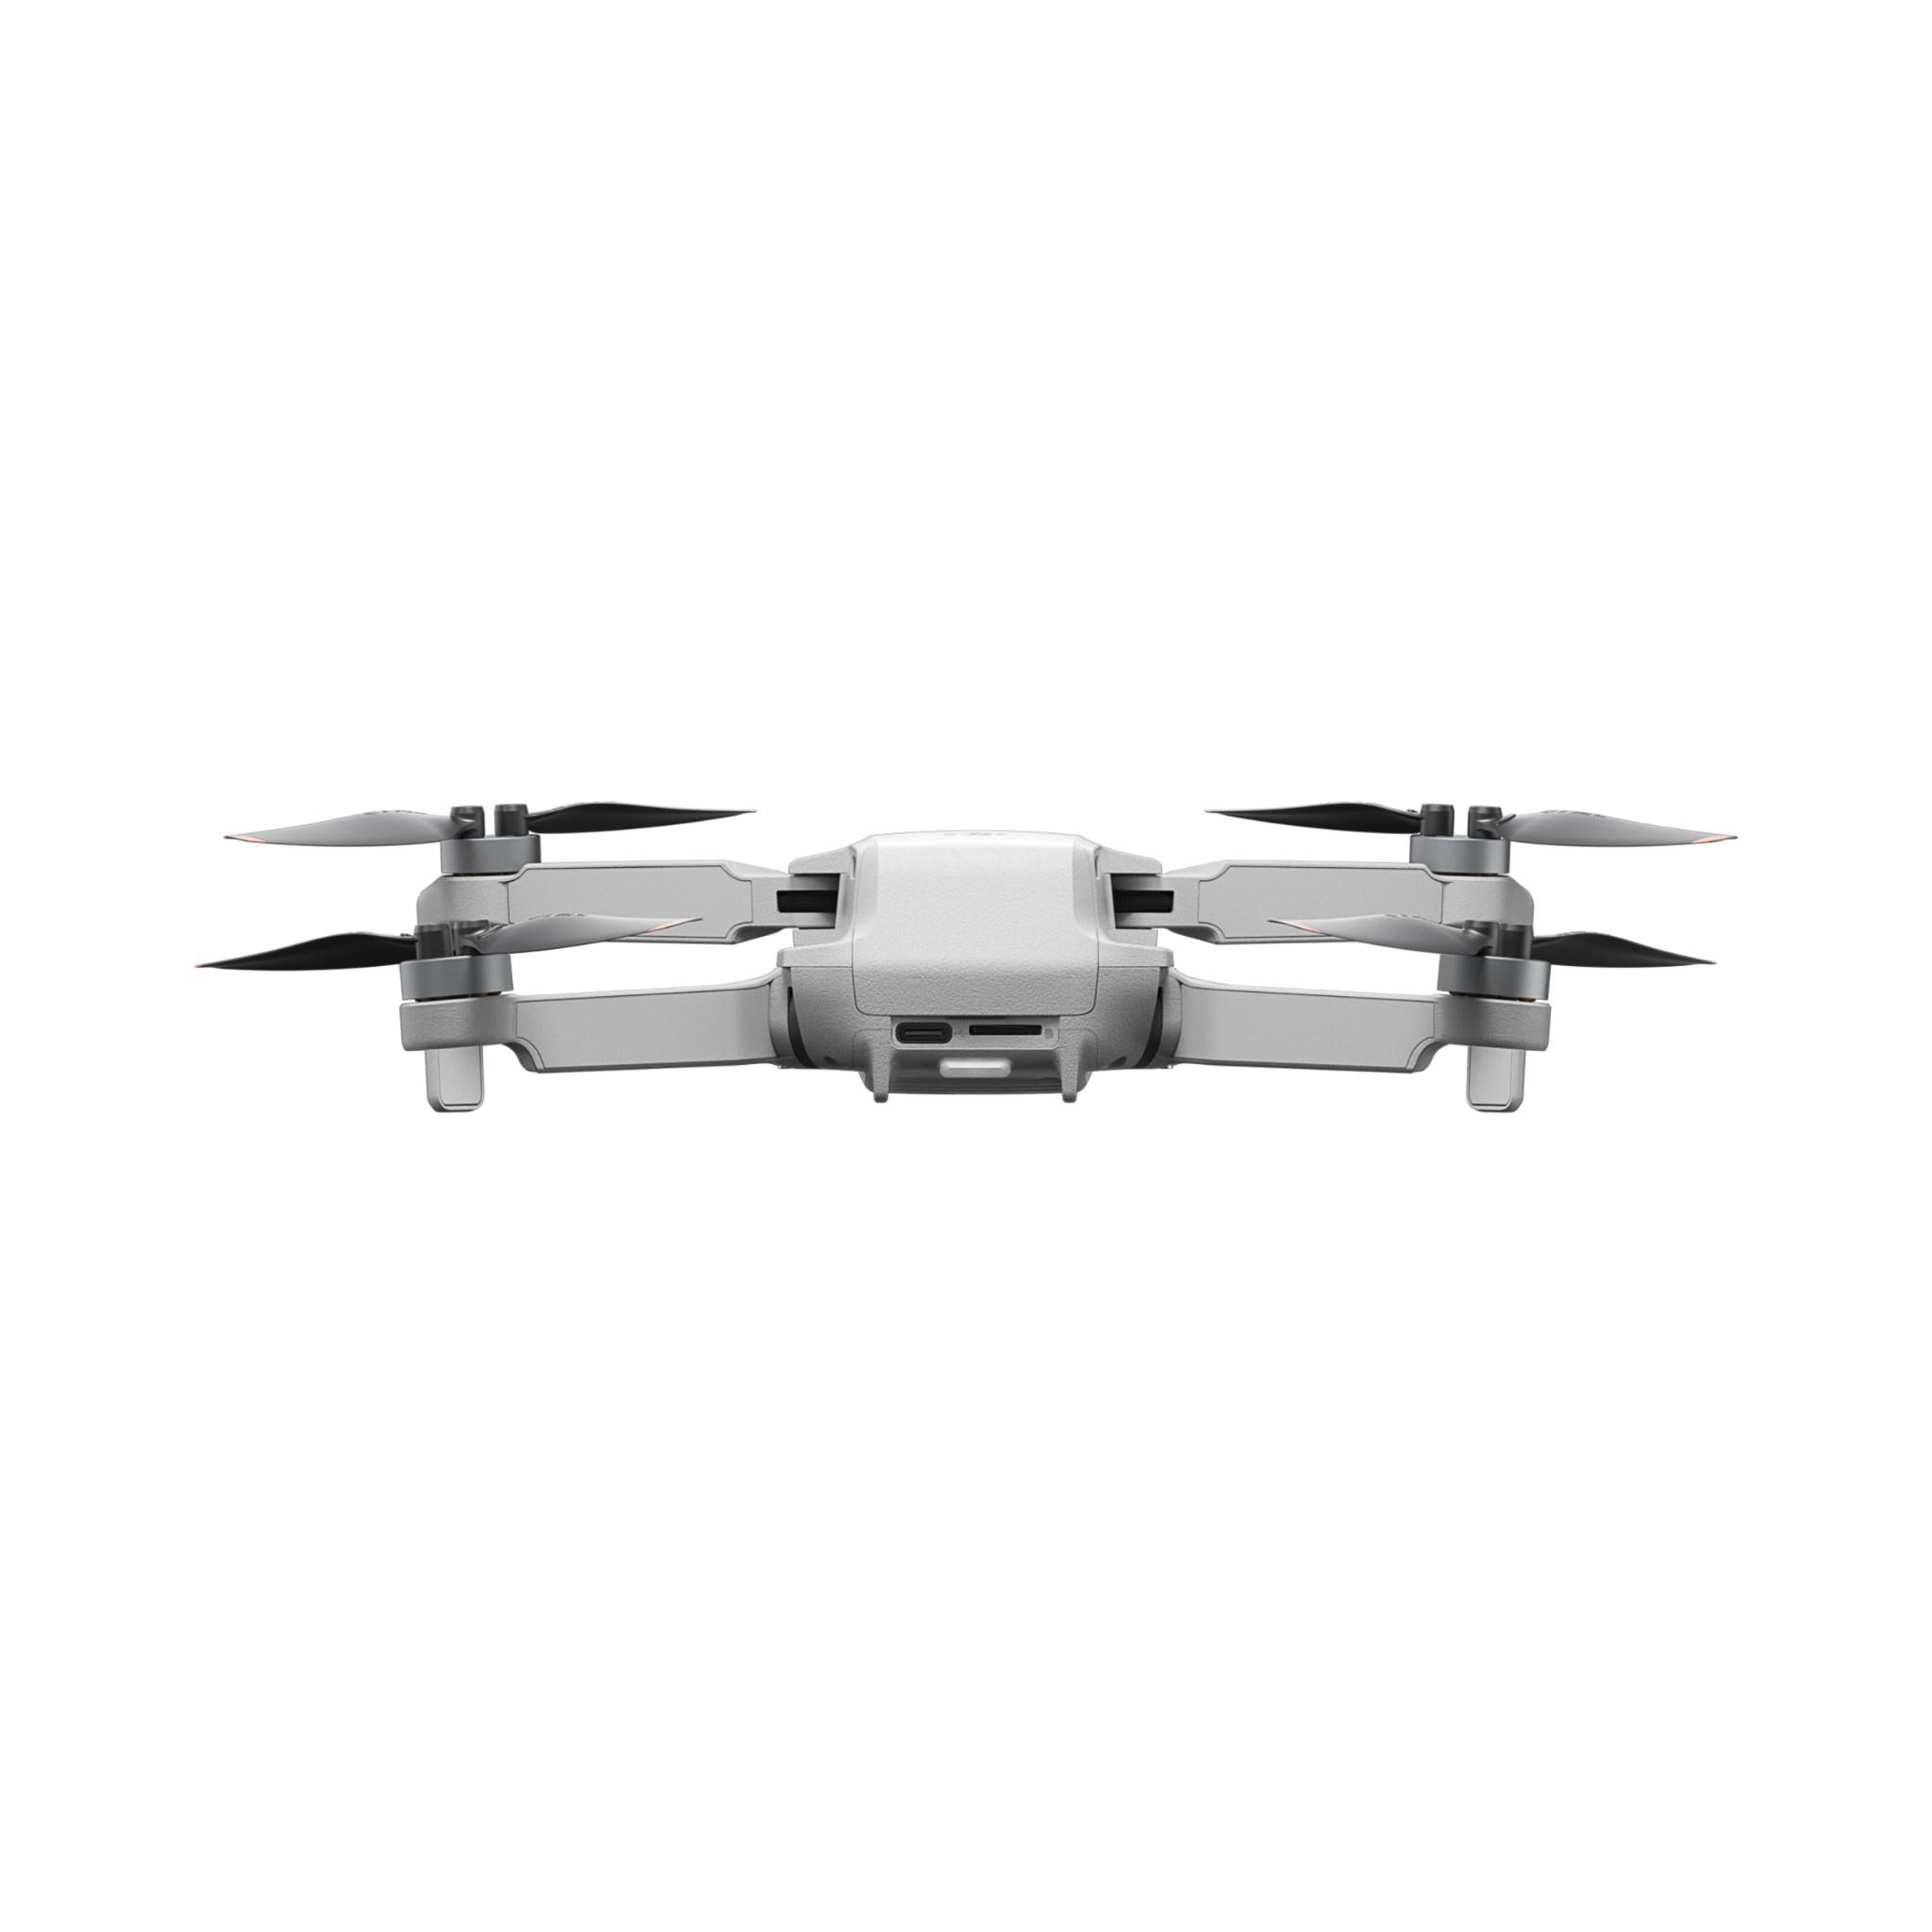 DJI Mini 2 SE, Lightweight and Foldable Mini Camera Drone with 2.7K Video, Intelligent Modes, 10km Video Transmission, 31-min Flight Time, Under 249 g, Easy to Use, Photo-Shooting Tour, Street Snap